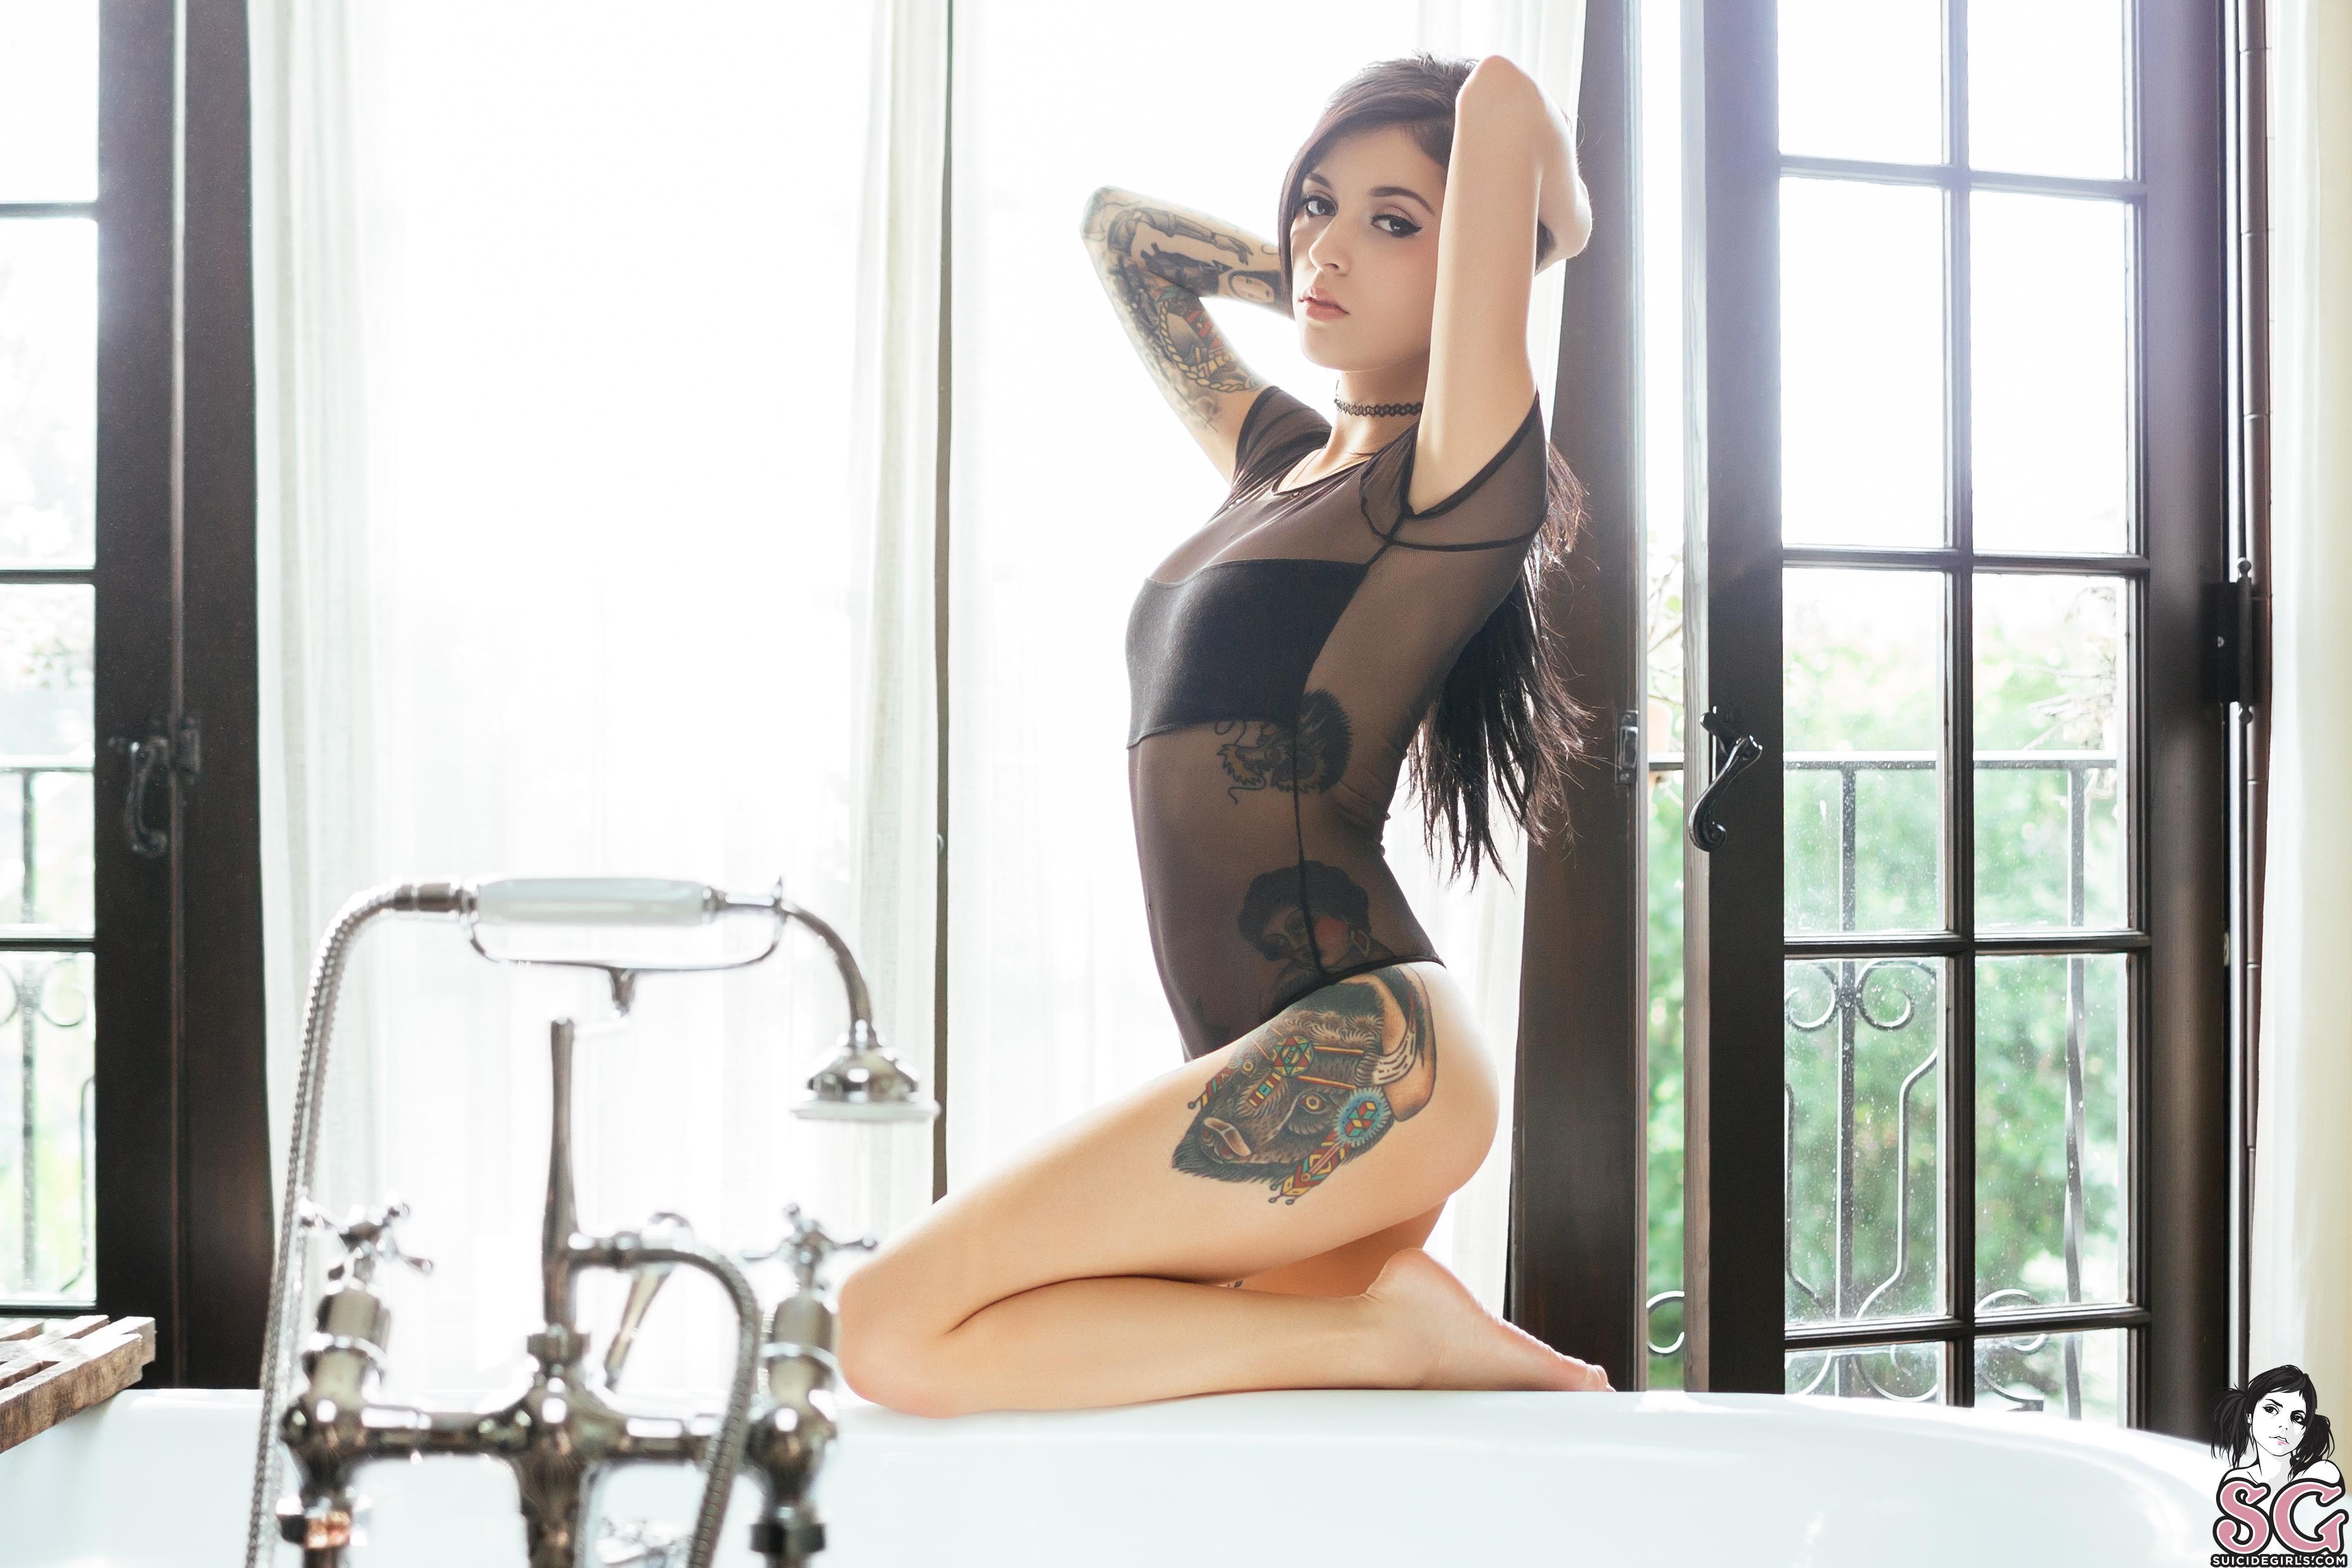 Những cô nàng thích "mực" - Phần 3 Shaved-Brunette-Camellia-with-Pale-Nipples-from-Suicide-Girls-Wearing-Black-Bodysuit-1